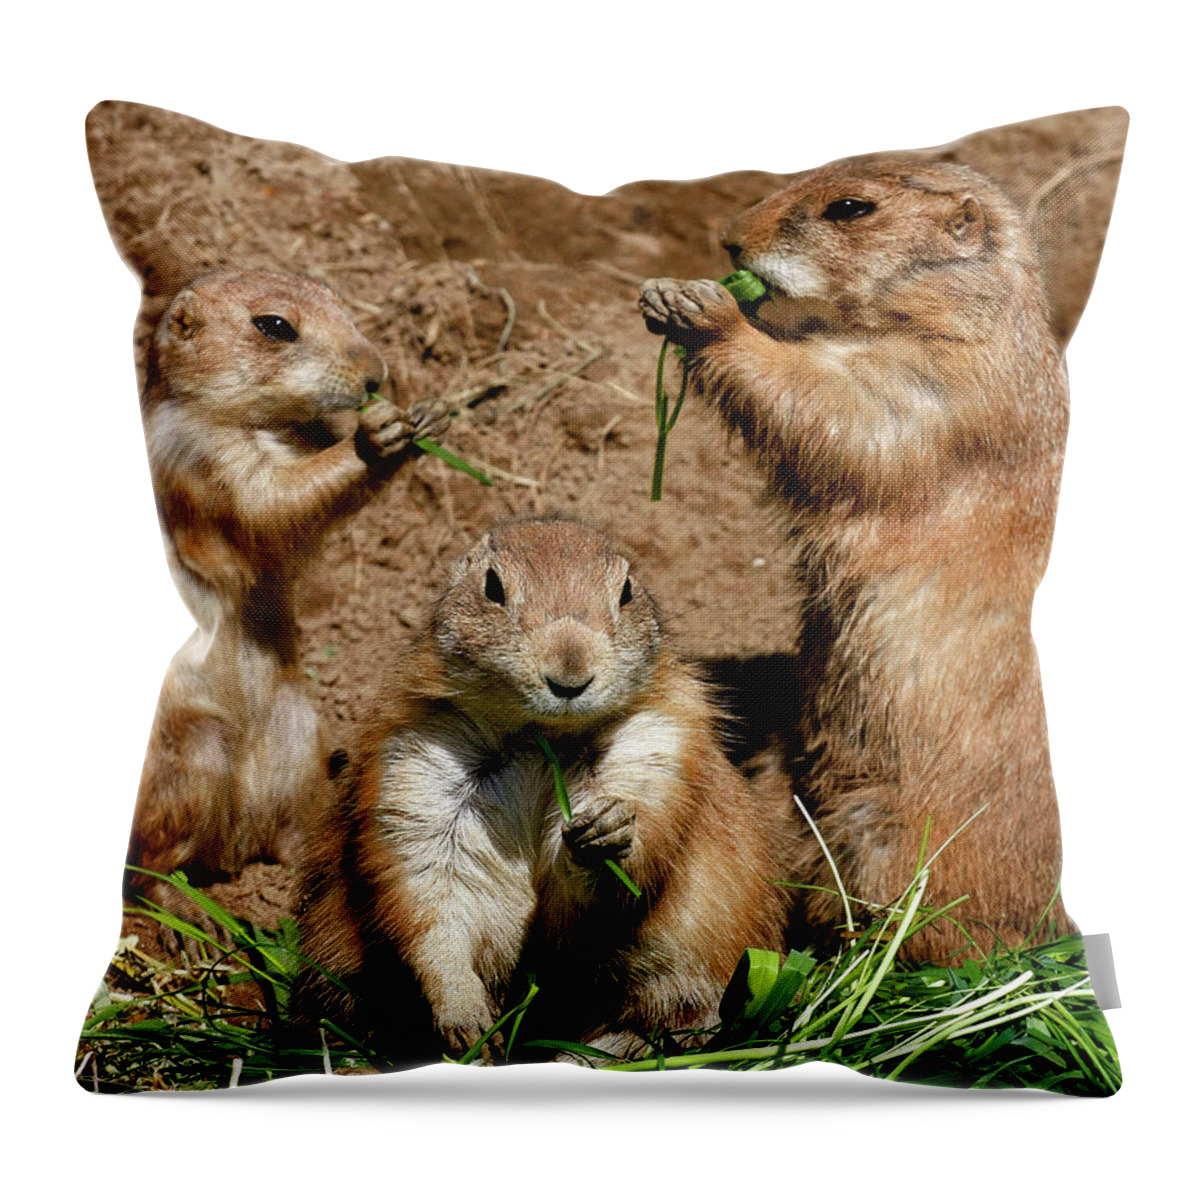 Chipmunks Lunch Together Throw Pillow featuring the photograph Chipmunks Having Lunch Together by David Morehead